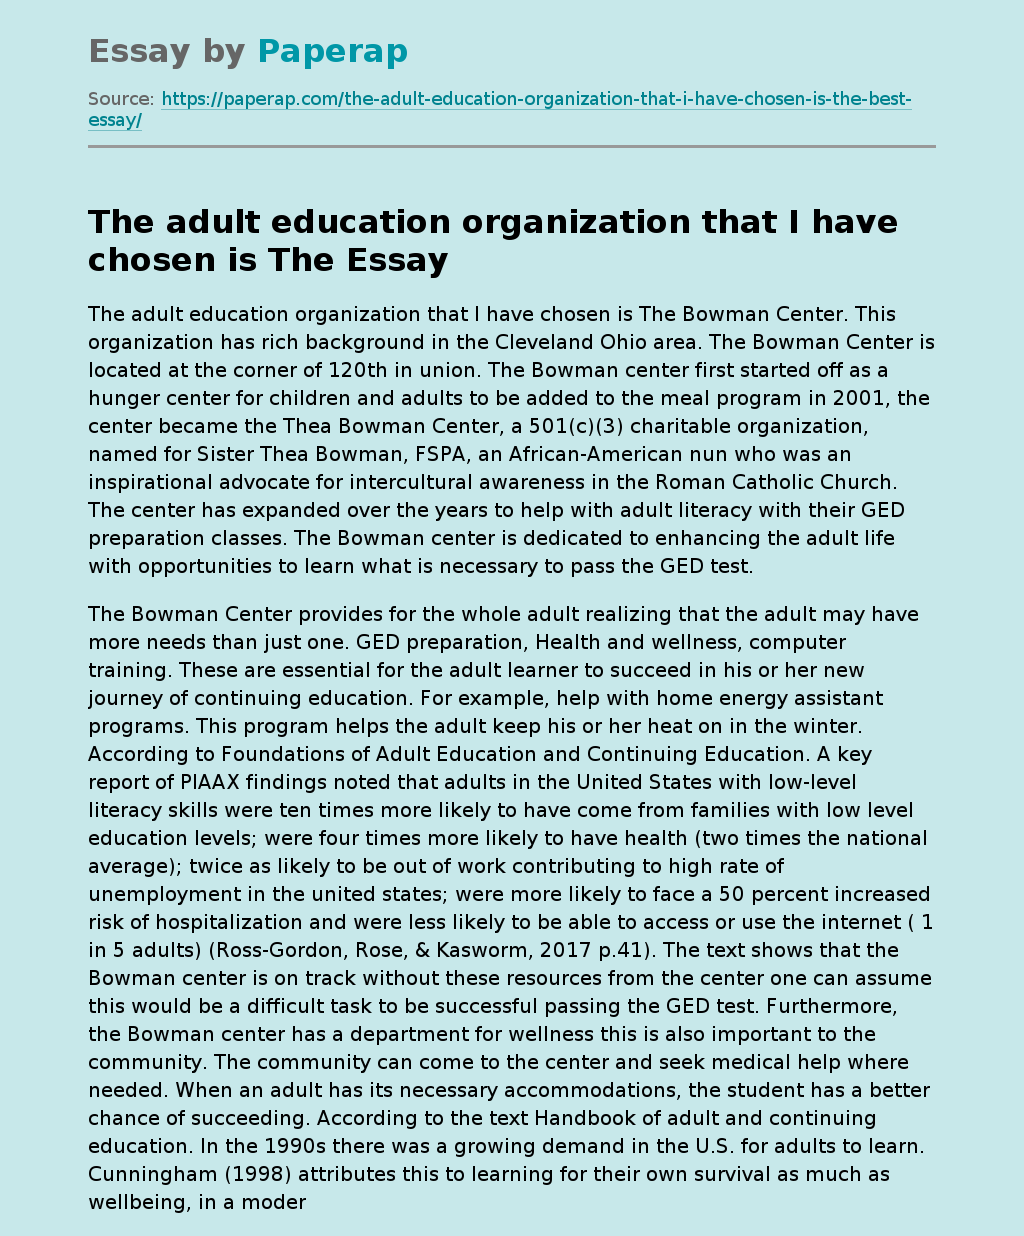 The adult education